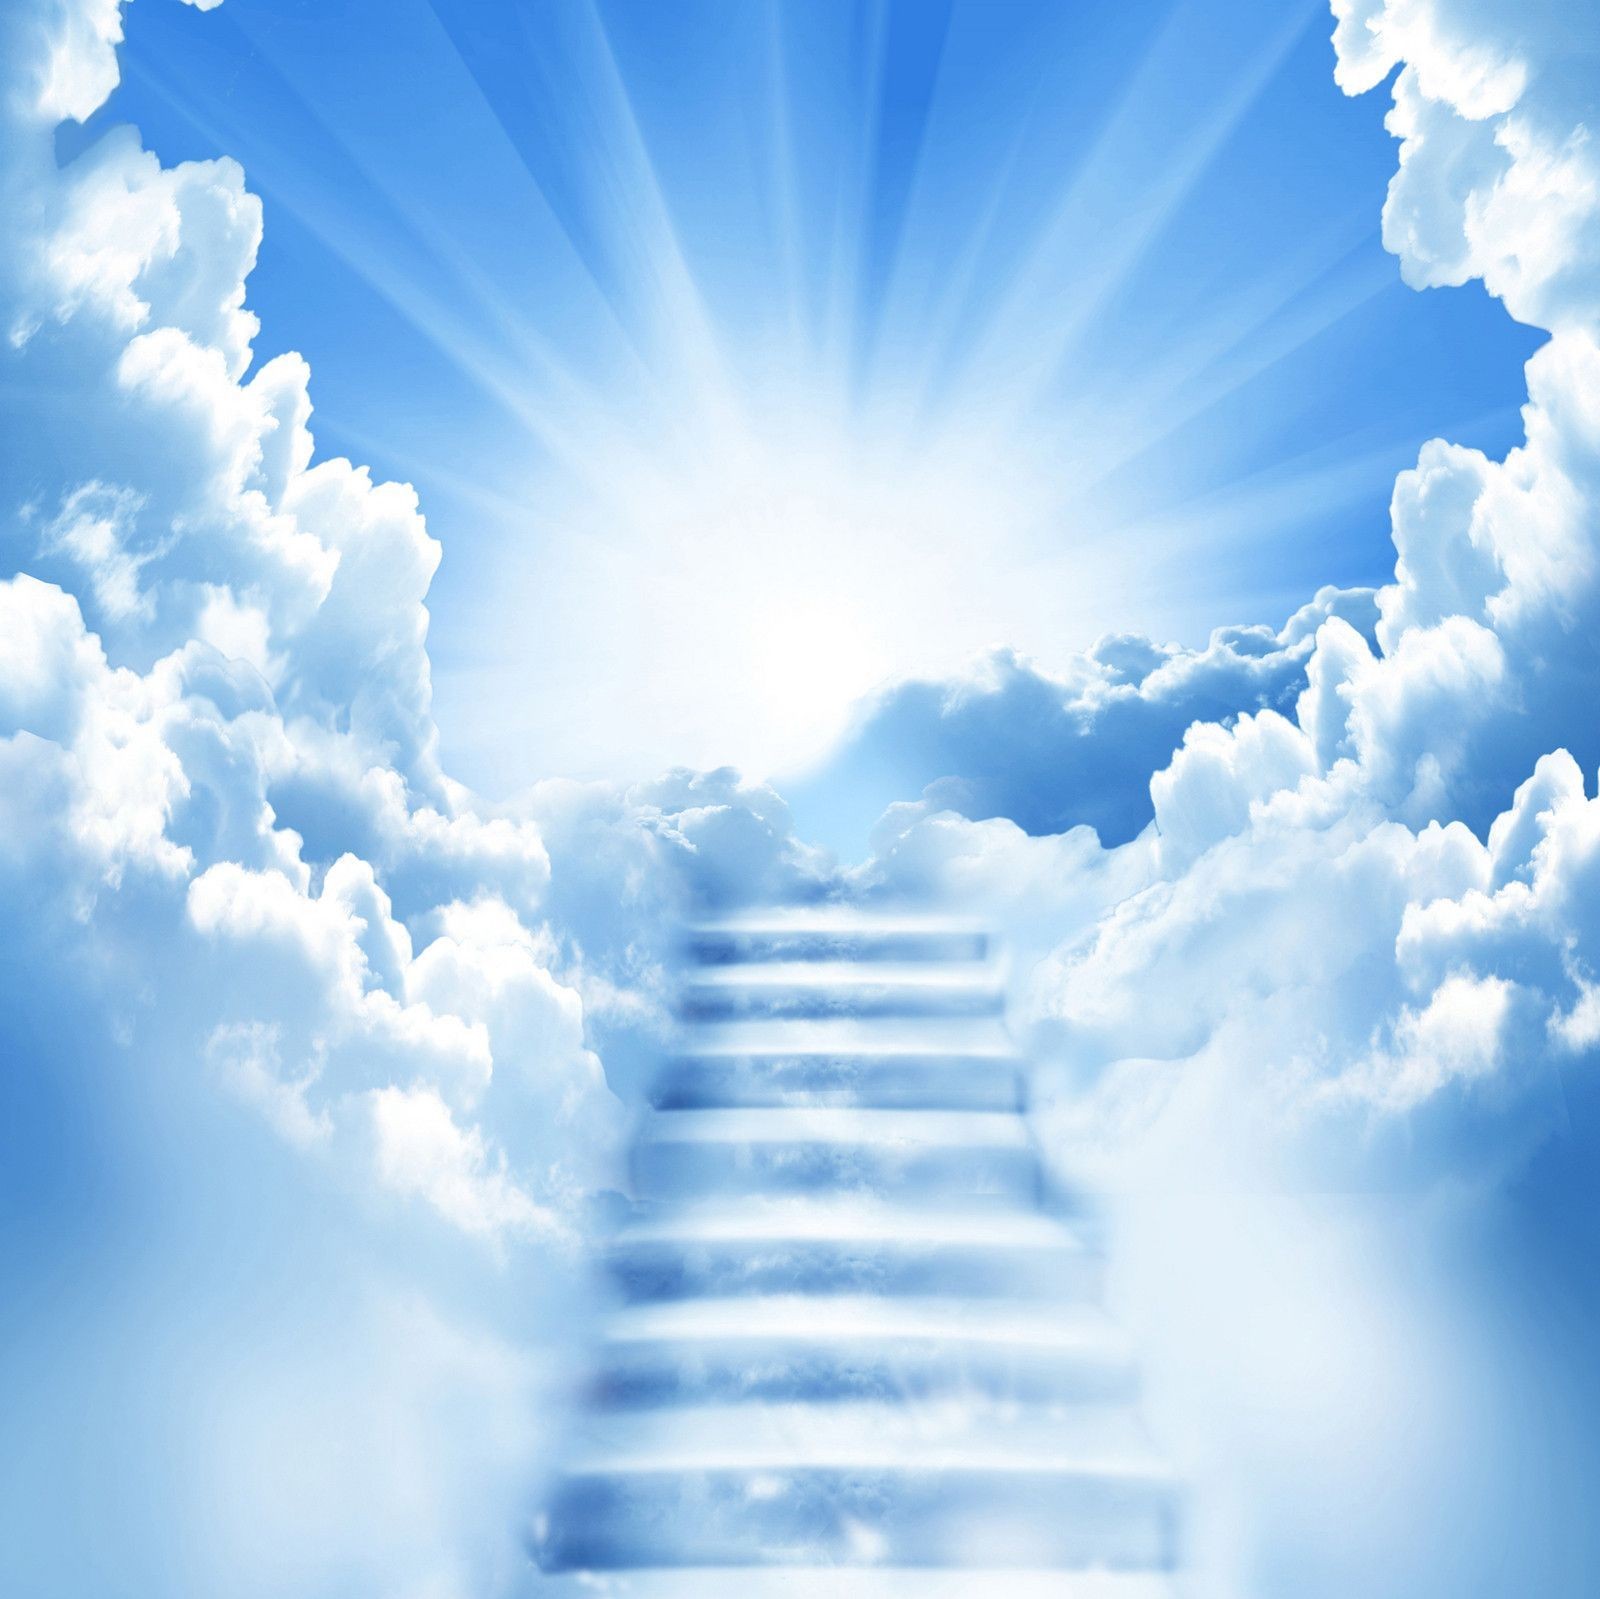 Funeral Background Pictures Clipart For Programs